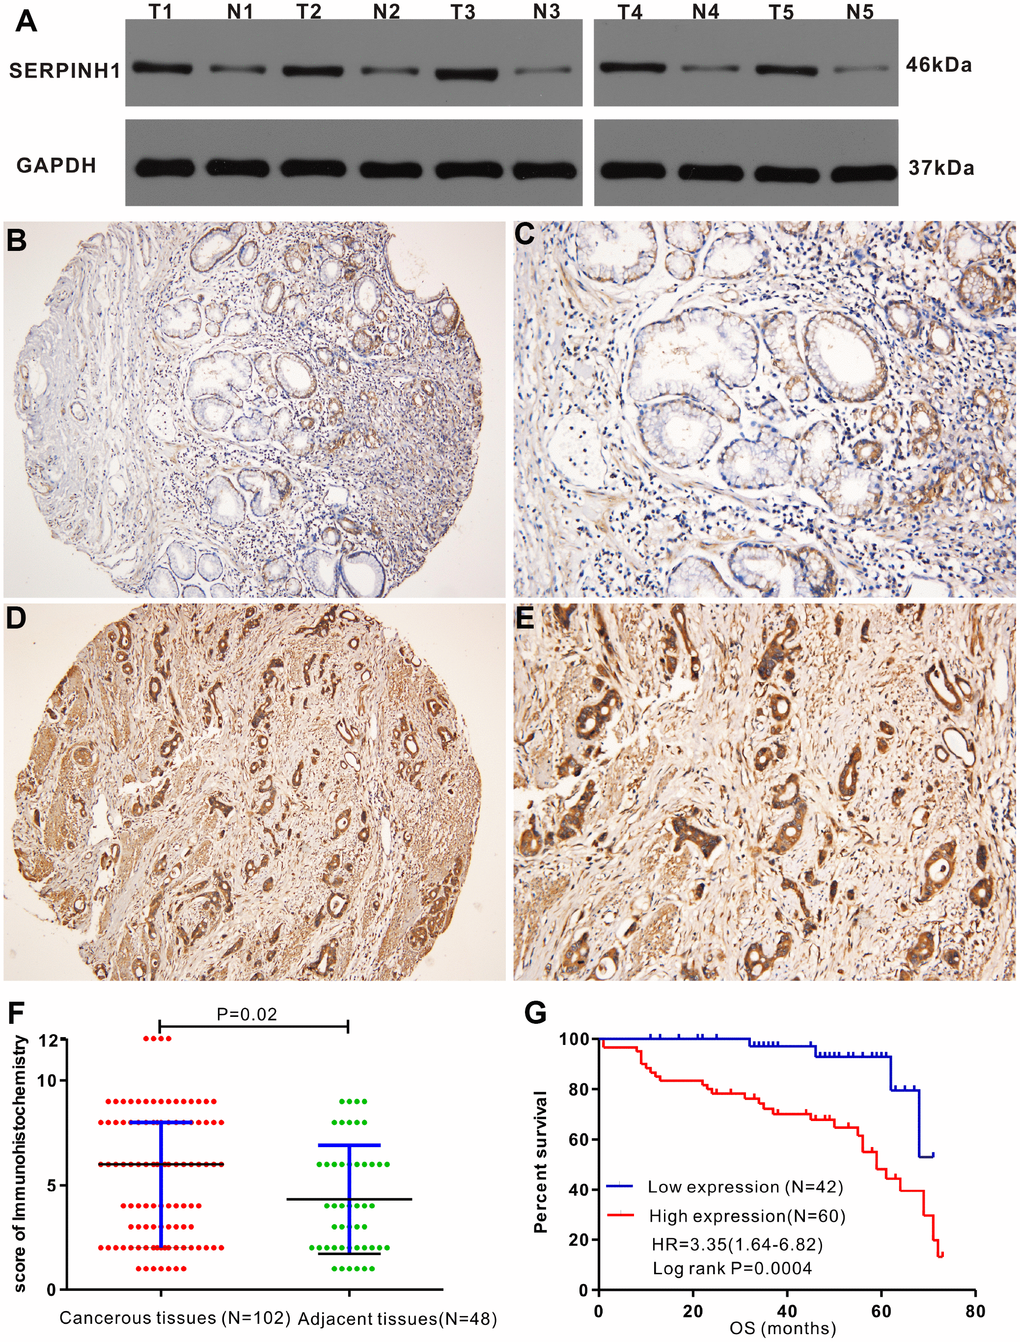 Immunohistochemical analysis of SERPINH1 protein expression in human GC tissues. (A) Immunohistochemical (IHC) analysis shows that SERPINH1 protein levels are significantly higher in five pairs of matched GC tissues compared with the adjacent non-tumor gastric mucosal tissues. (B–E) Representative images show IHC staining of SERPINH1 protein in (B, C) normal gastric mucosal tissues and (D, E) gastric cancer tissues at 100X and 200X magnification, respectively. (F) Comparison of IHC scores show that SERPINH1 protein expression is significantly higher (P=0.02) in gastric cancer tissues (N=102) compared with adjacent non-tumor gastric tissues (N=48). (G) Survival curve analysis shows that GC patients with high SERPINH1 protein levels exhibit poorer OS than patients with low SERPINH1 protein levels (HR=3.35, P=0.0004).